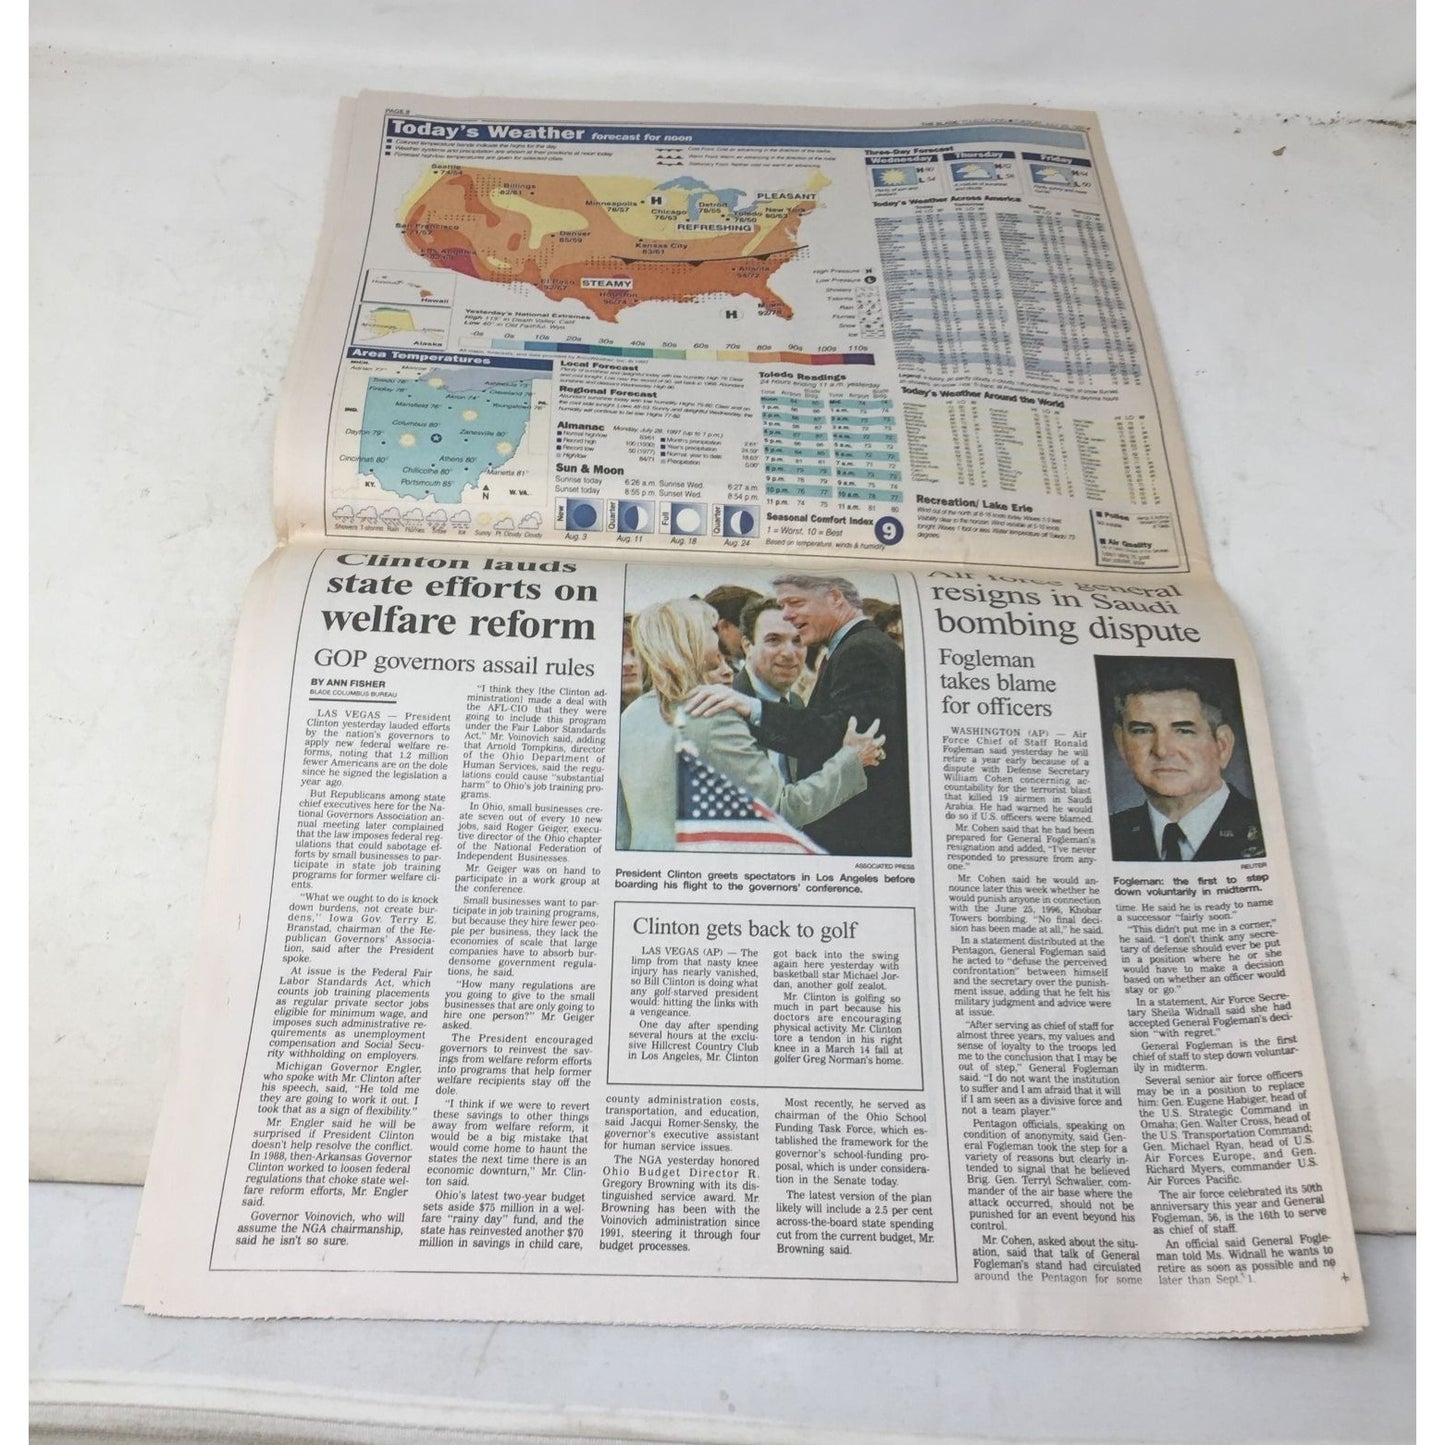 Lot of Vintage Newspapers- The Blade July 29, 1997